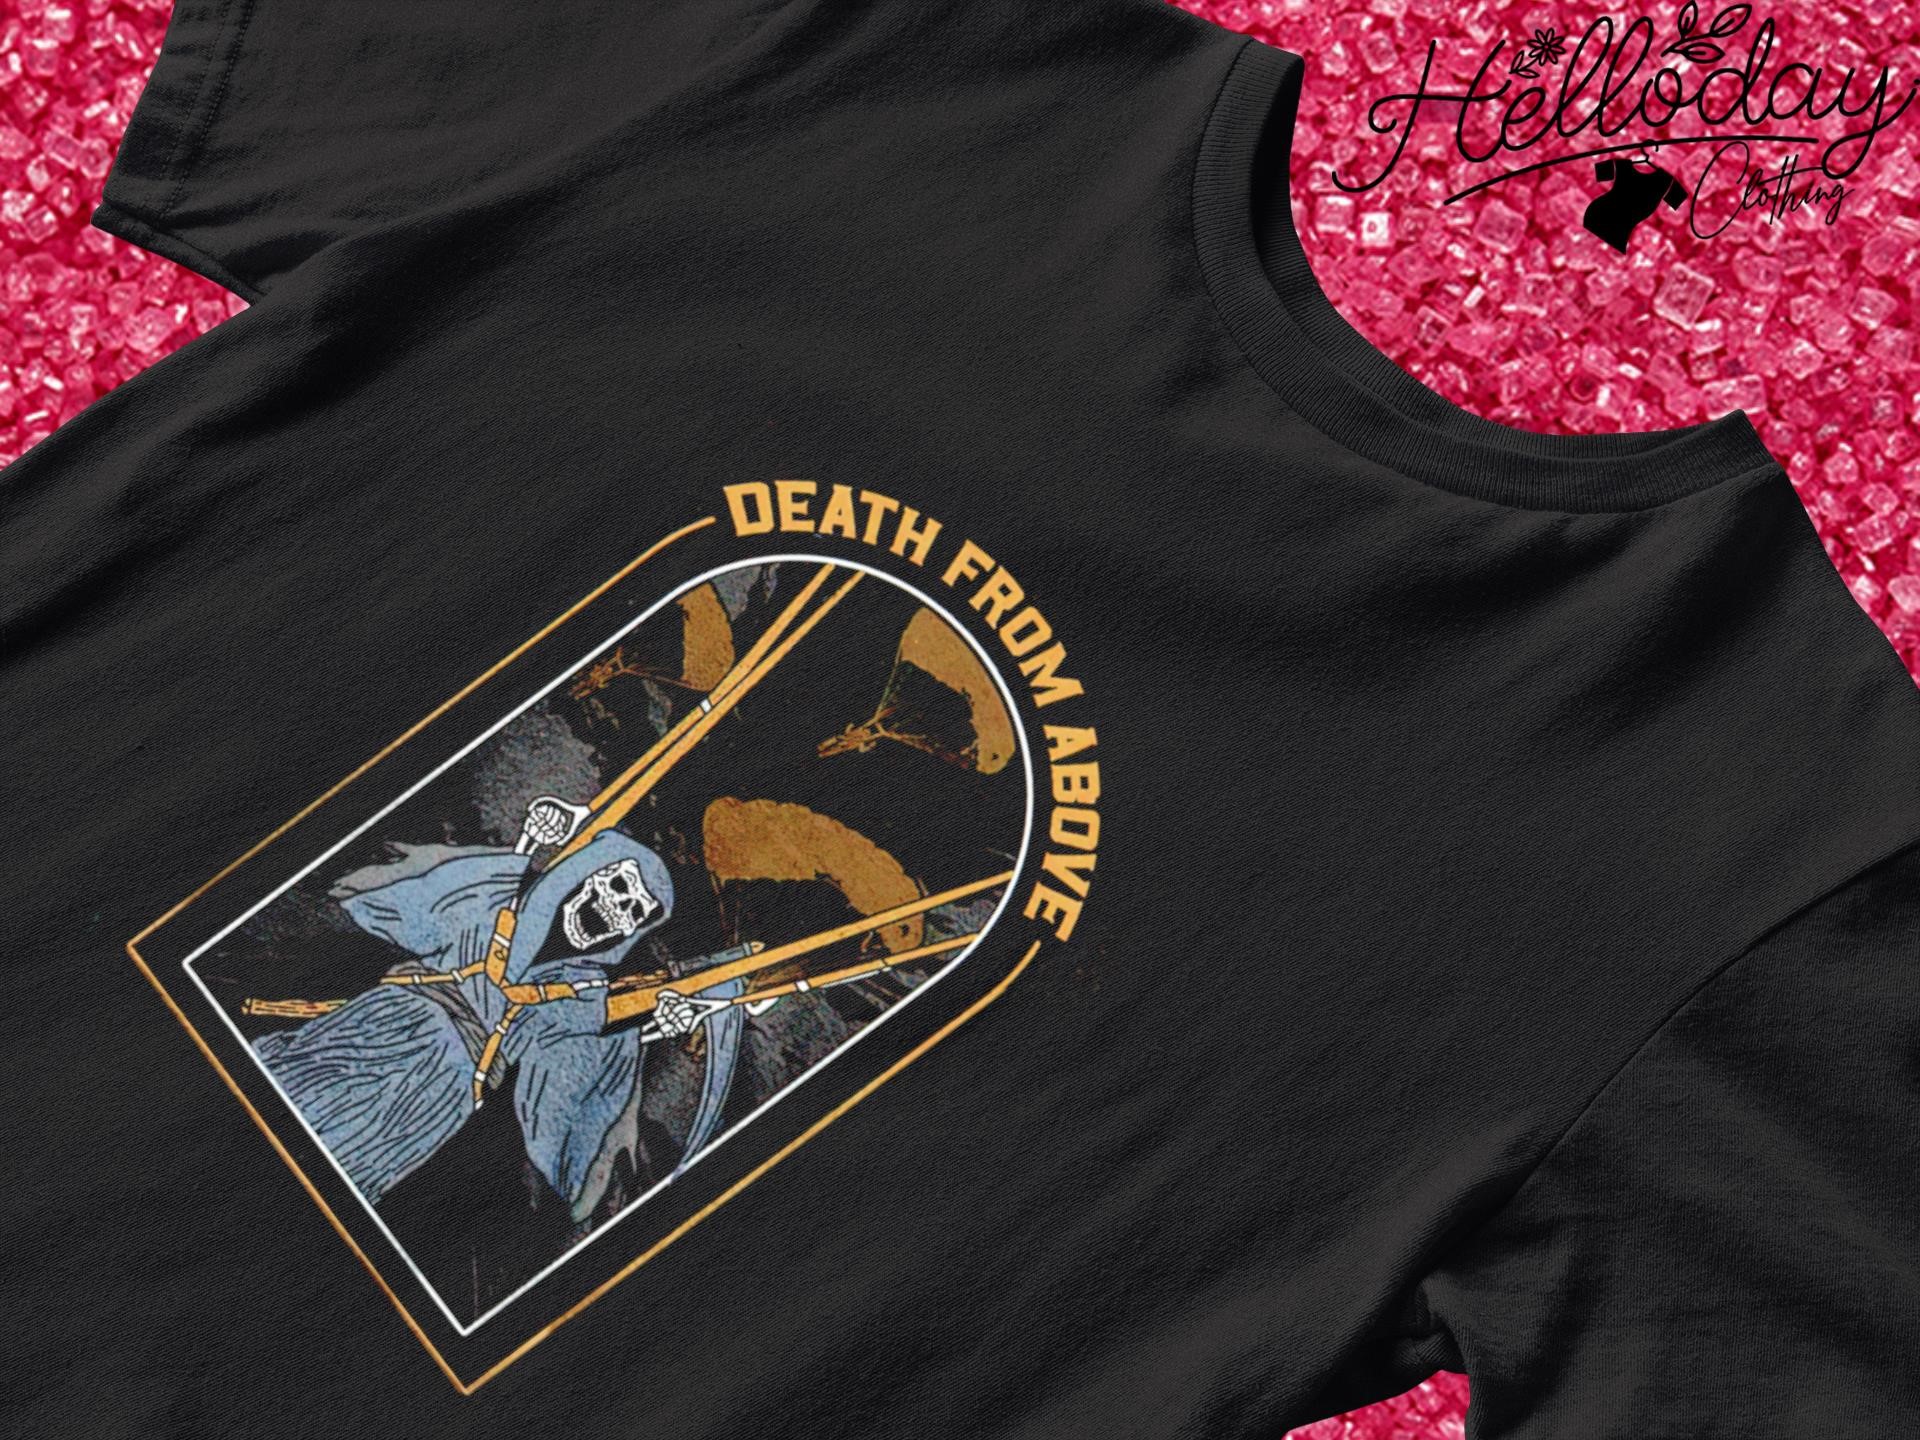 Death from above shirt